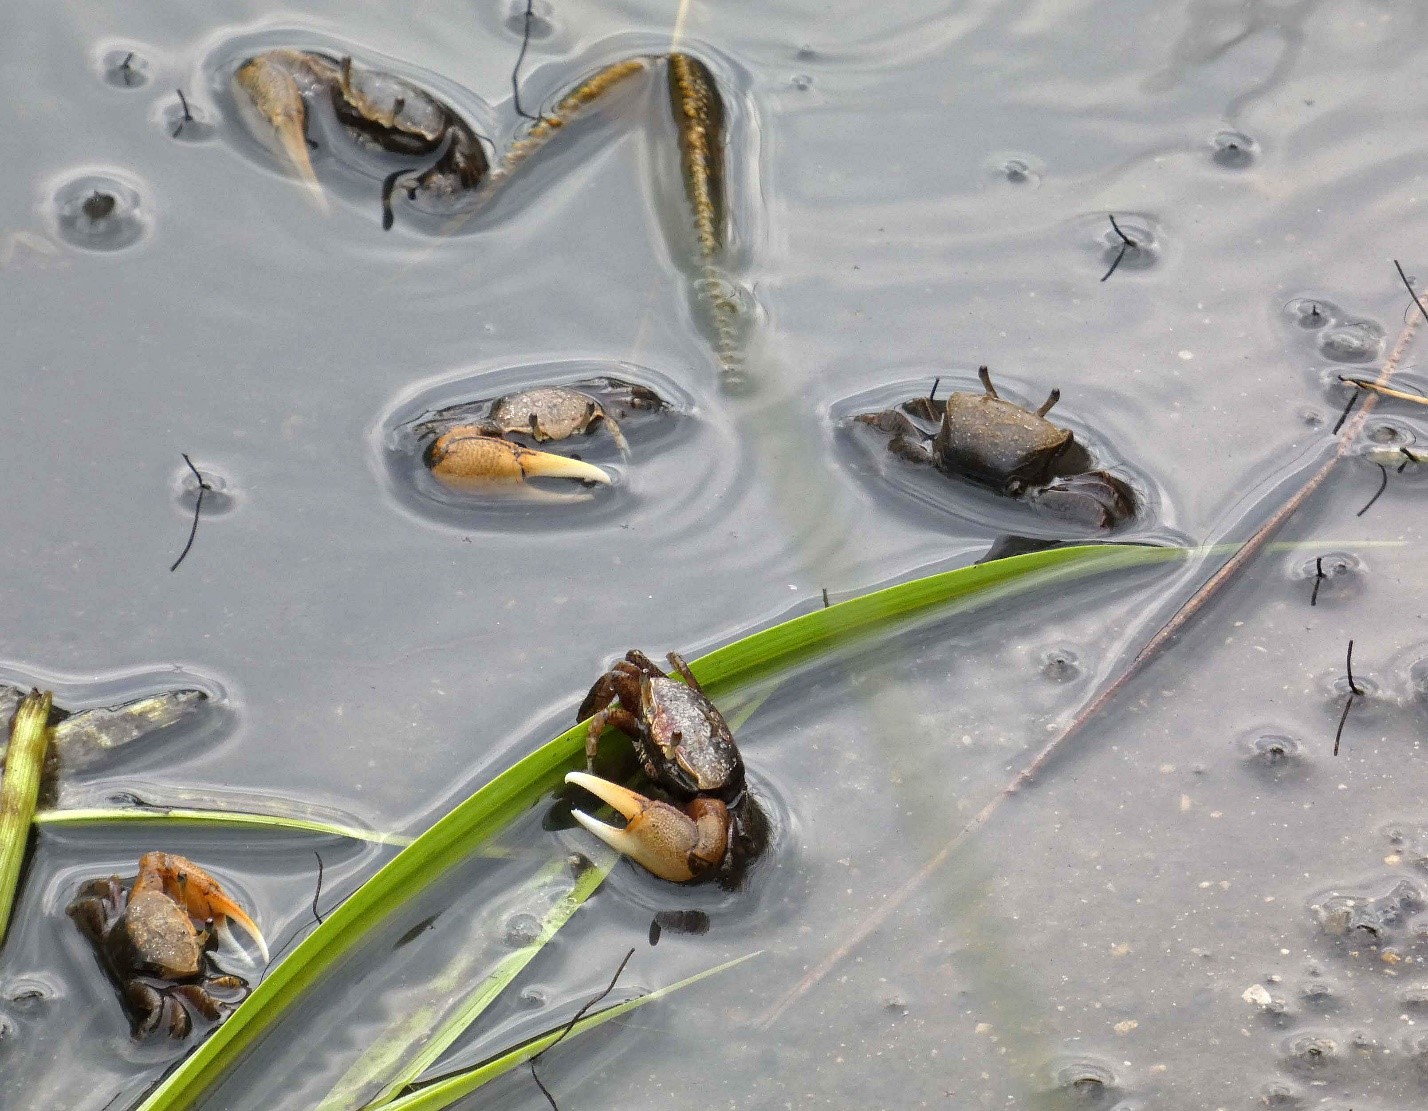 Five crabs in sandy water with a few blades of marsh grass around them.